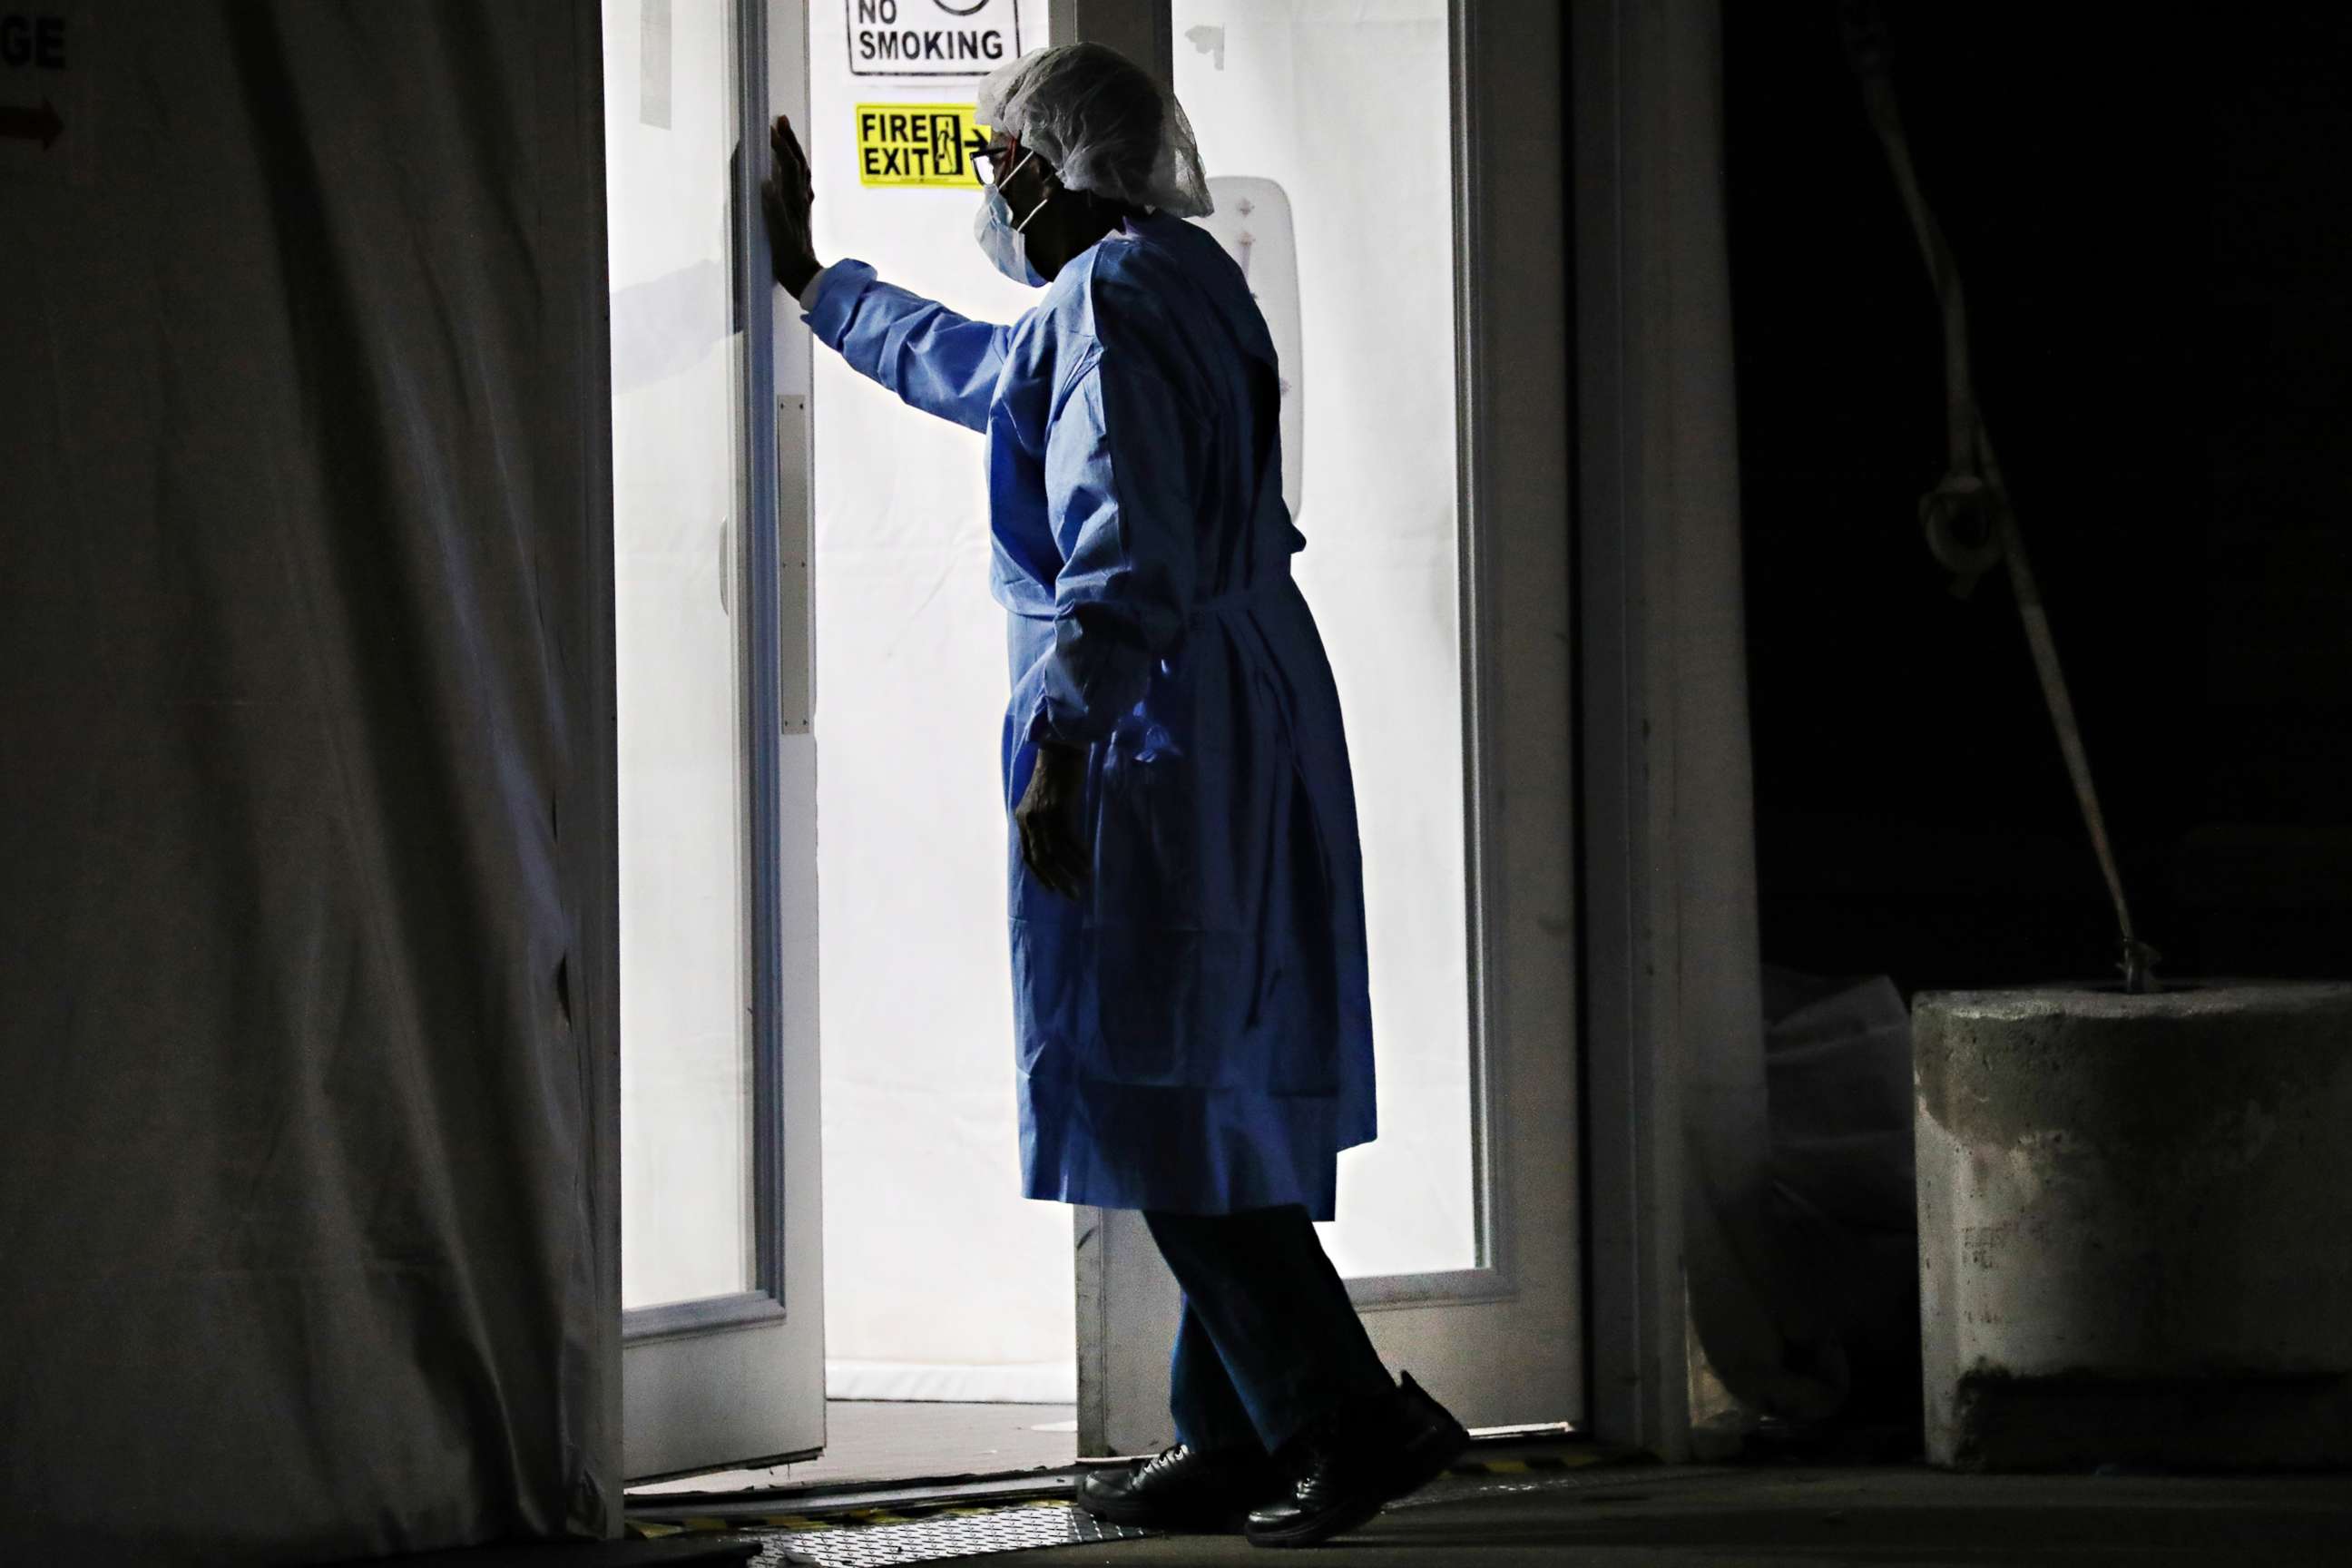 PHOTO: Medical worker on the night shift outside of a special coronavirus intake area at Maimonides Medical Center, on April 15, 2020, in the Borough Park neighborhood of the Brooklyn, New York.